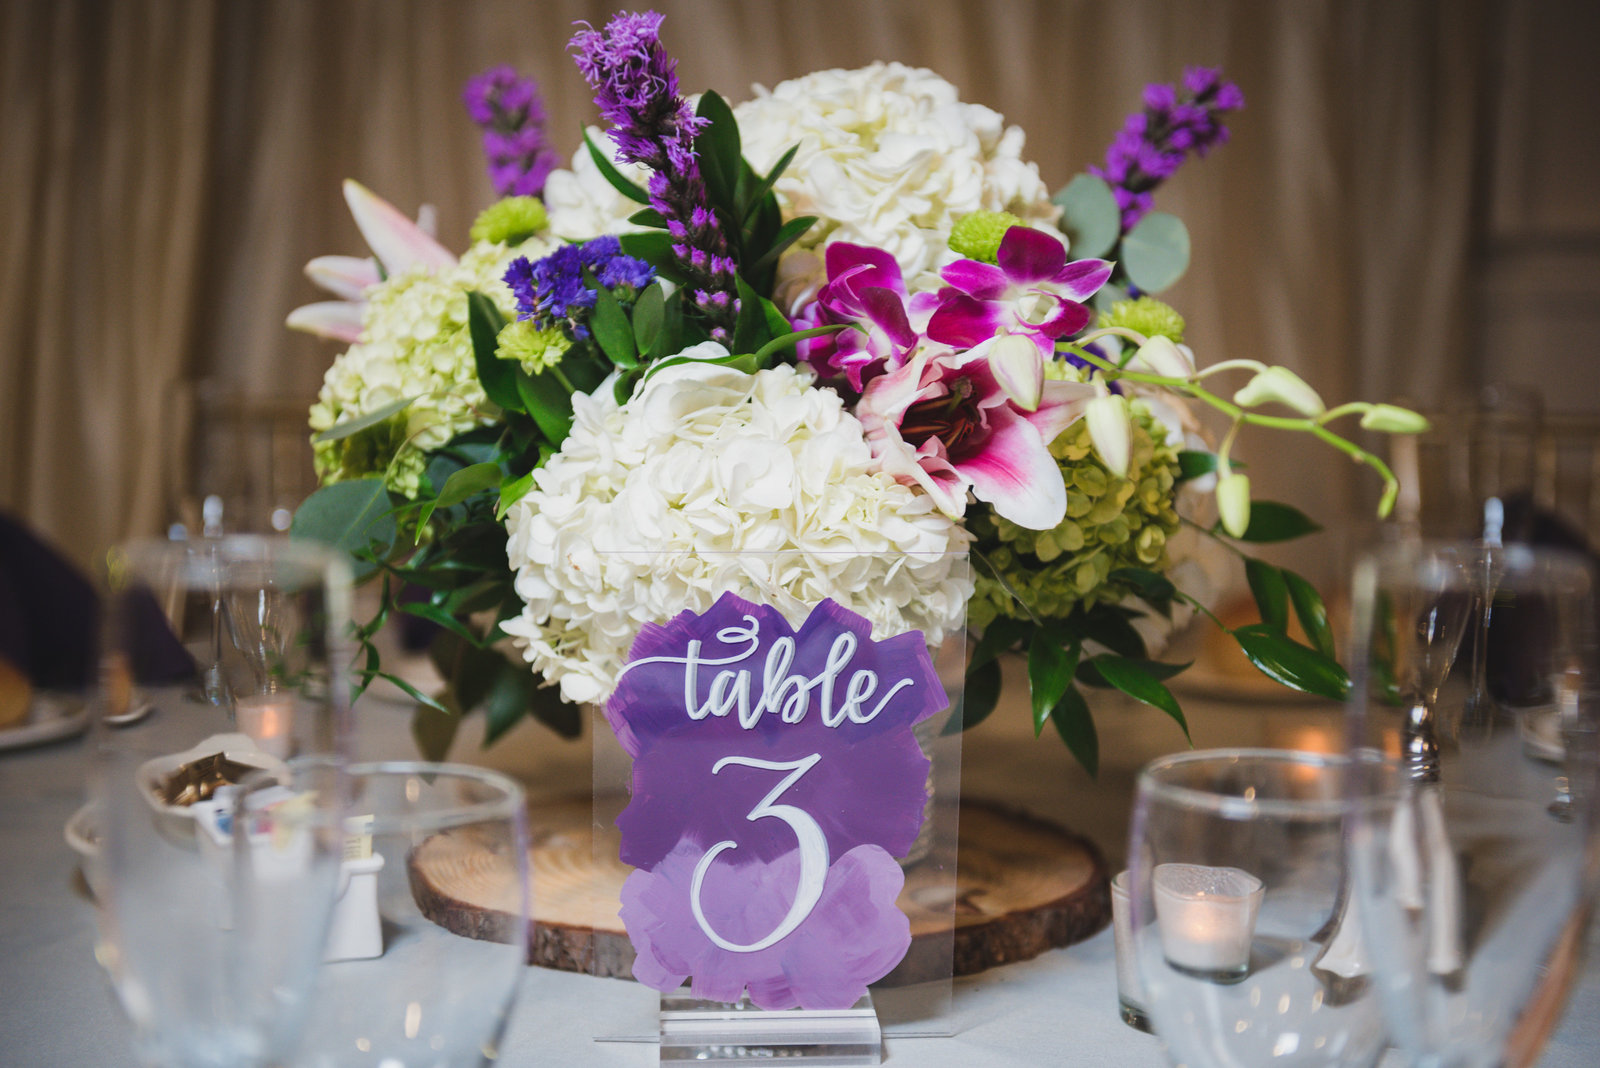 photo of centerpiece and table decor from wedding at Sea Cliff Manor